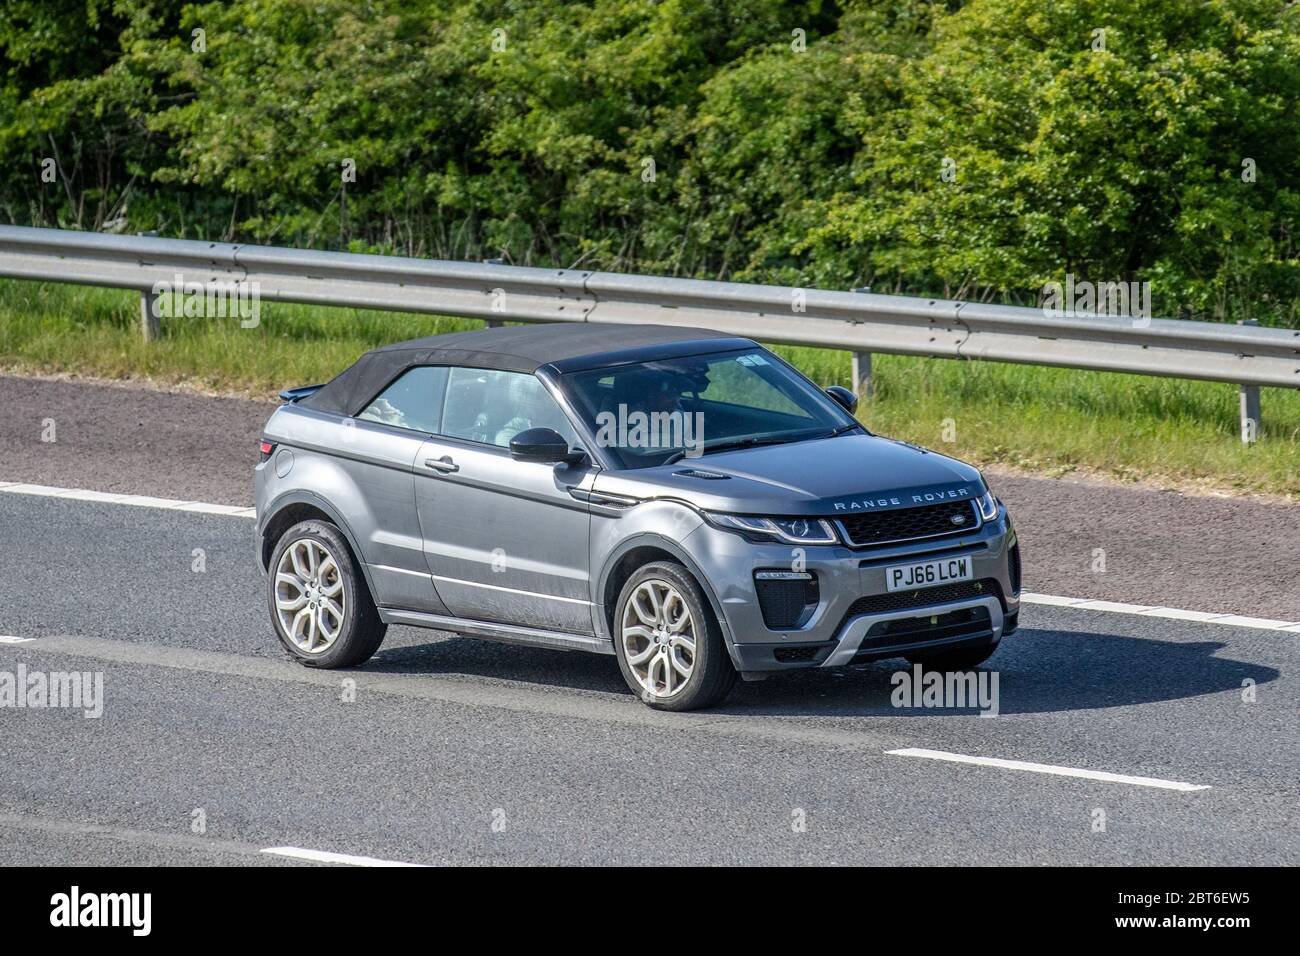 2016 grey Land Rover R Rover Evoque HSE DYN TD; Vehicular traffic moving vehicles, cars driving vehicle on UK roads, motors, motoring on the M61 motorway highway Stock Photo